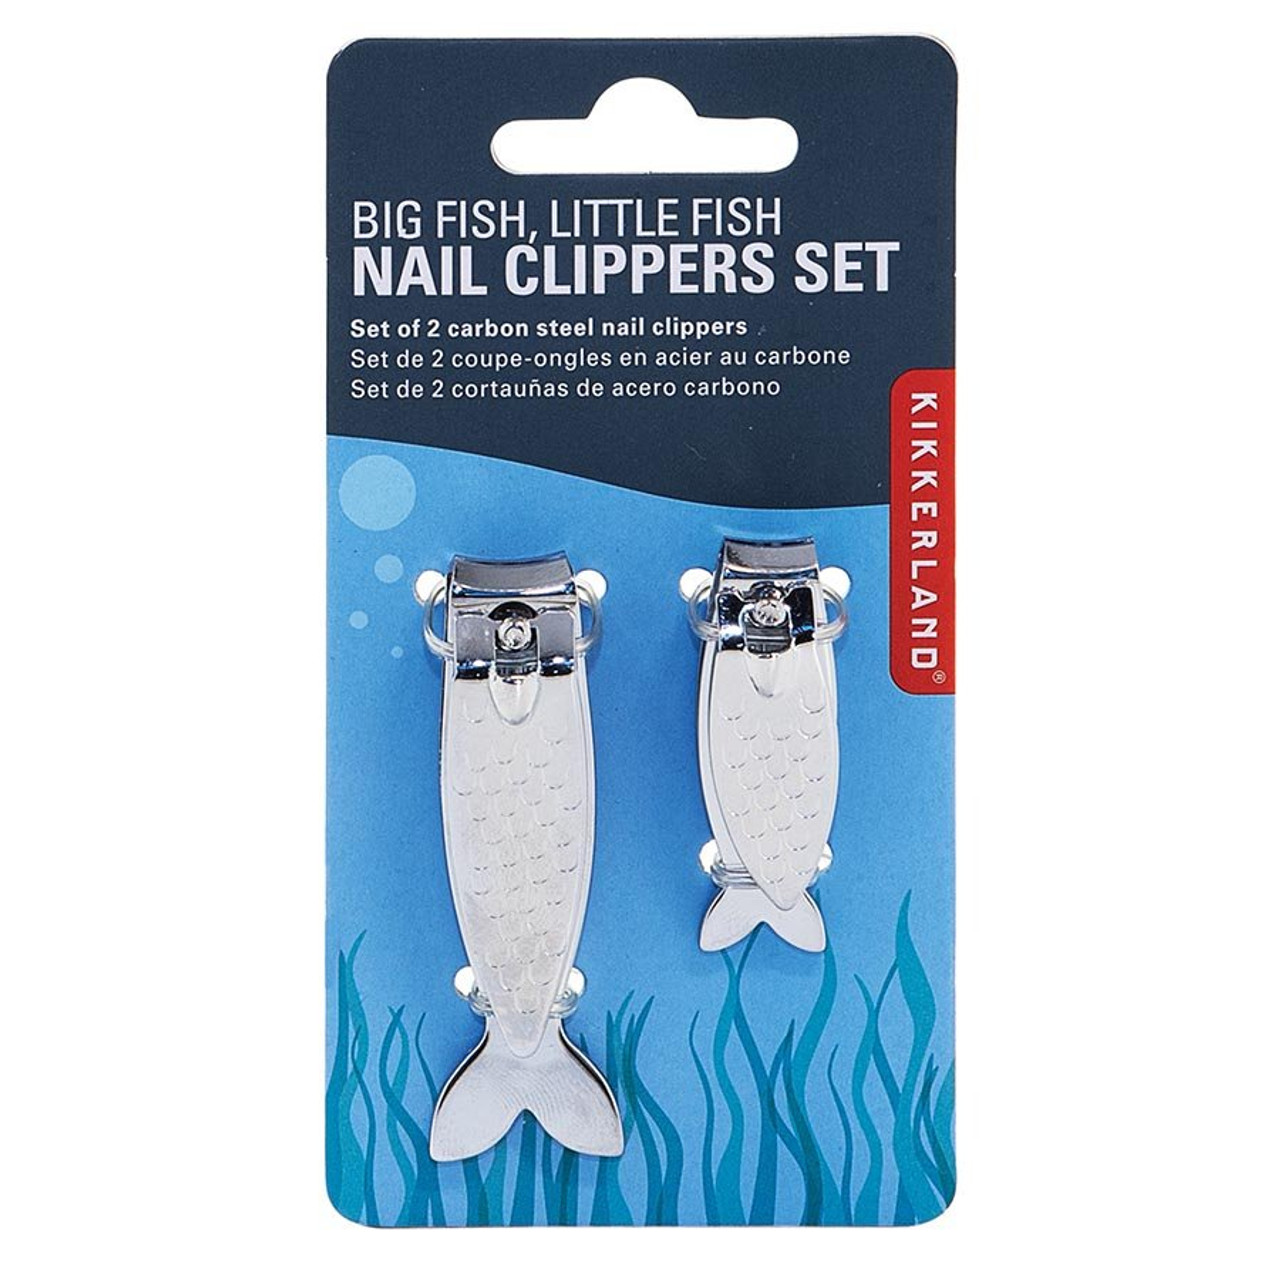 Save on Always My Baby Nail Clippers Order Online Delivery | GIANT